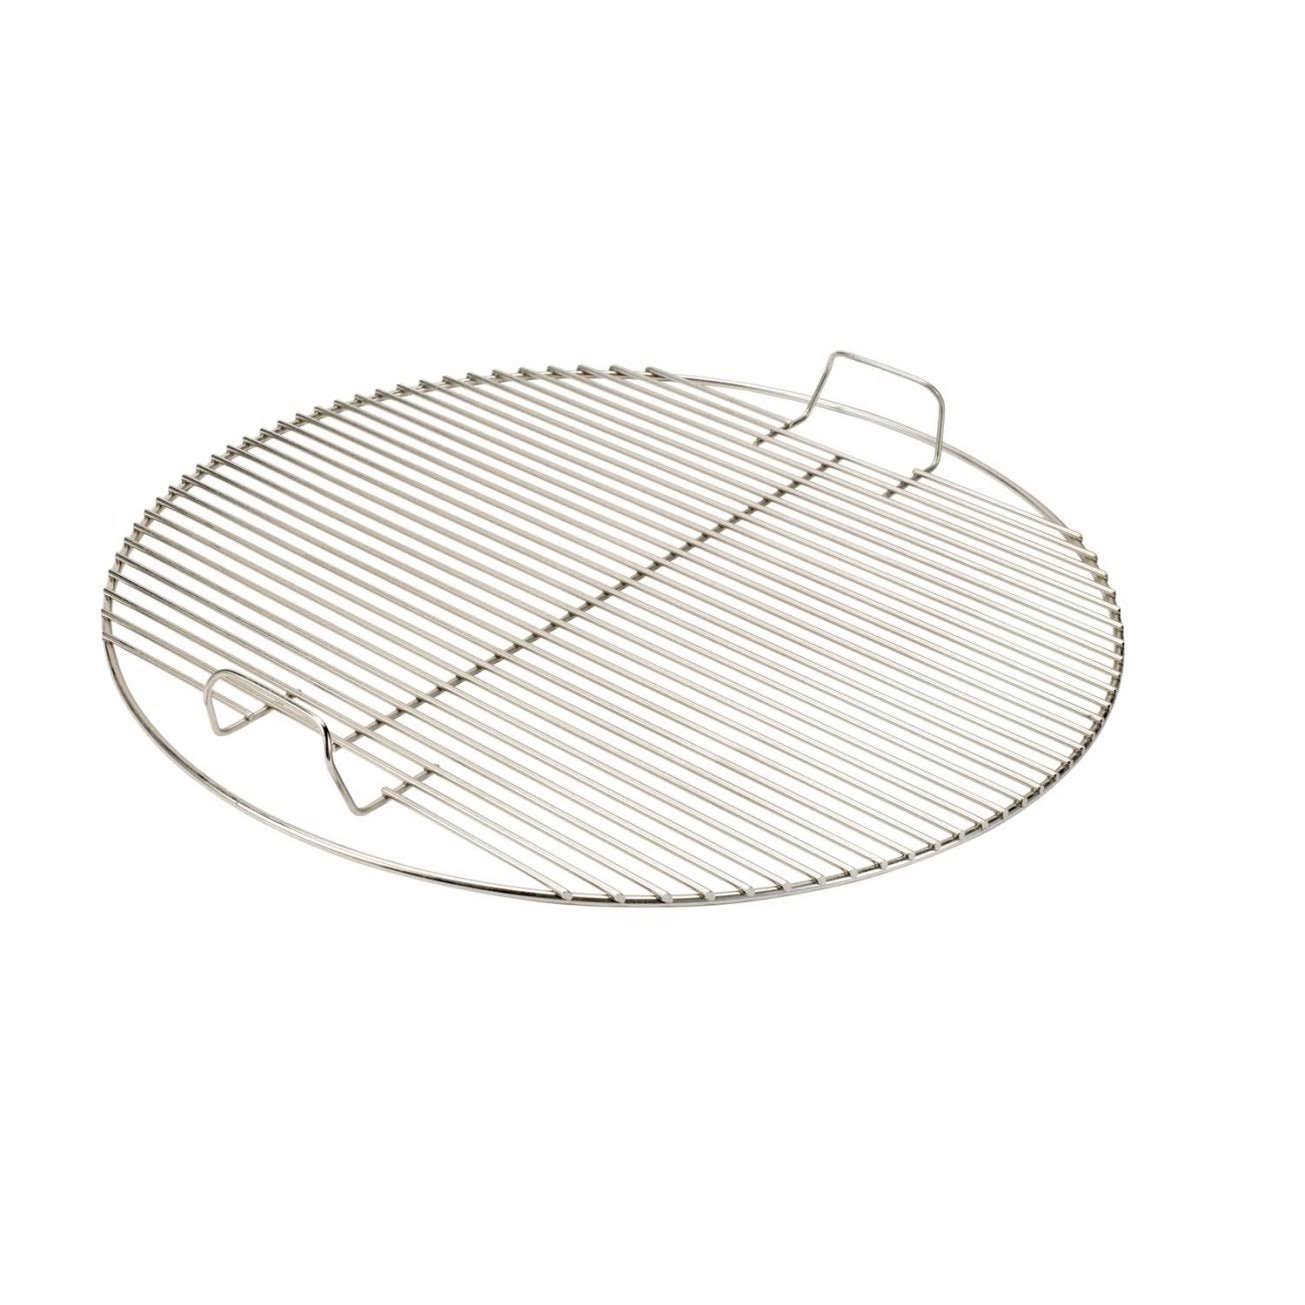 Weber Charcoal Steel Grill Cooking Grate - 18.5"